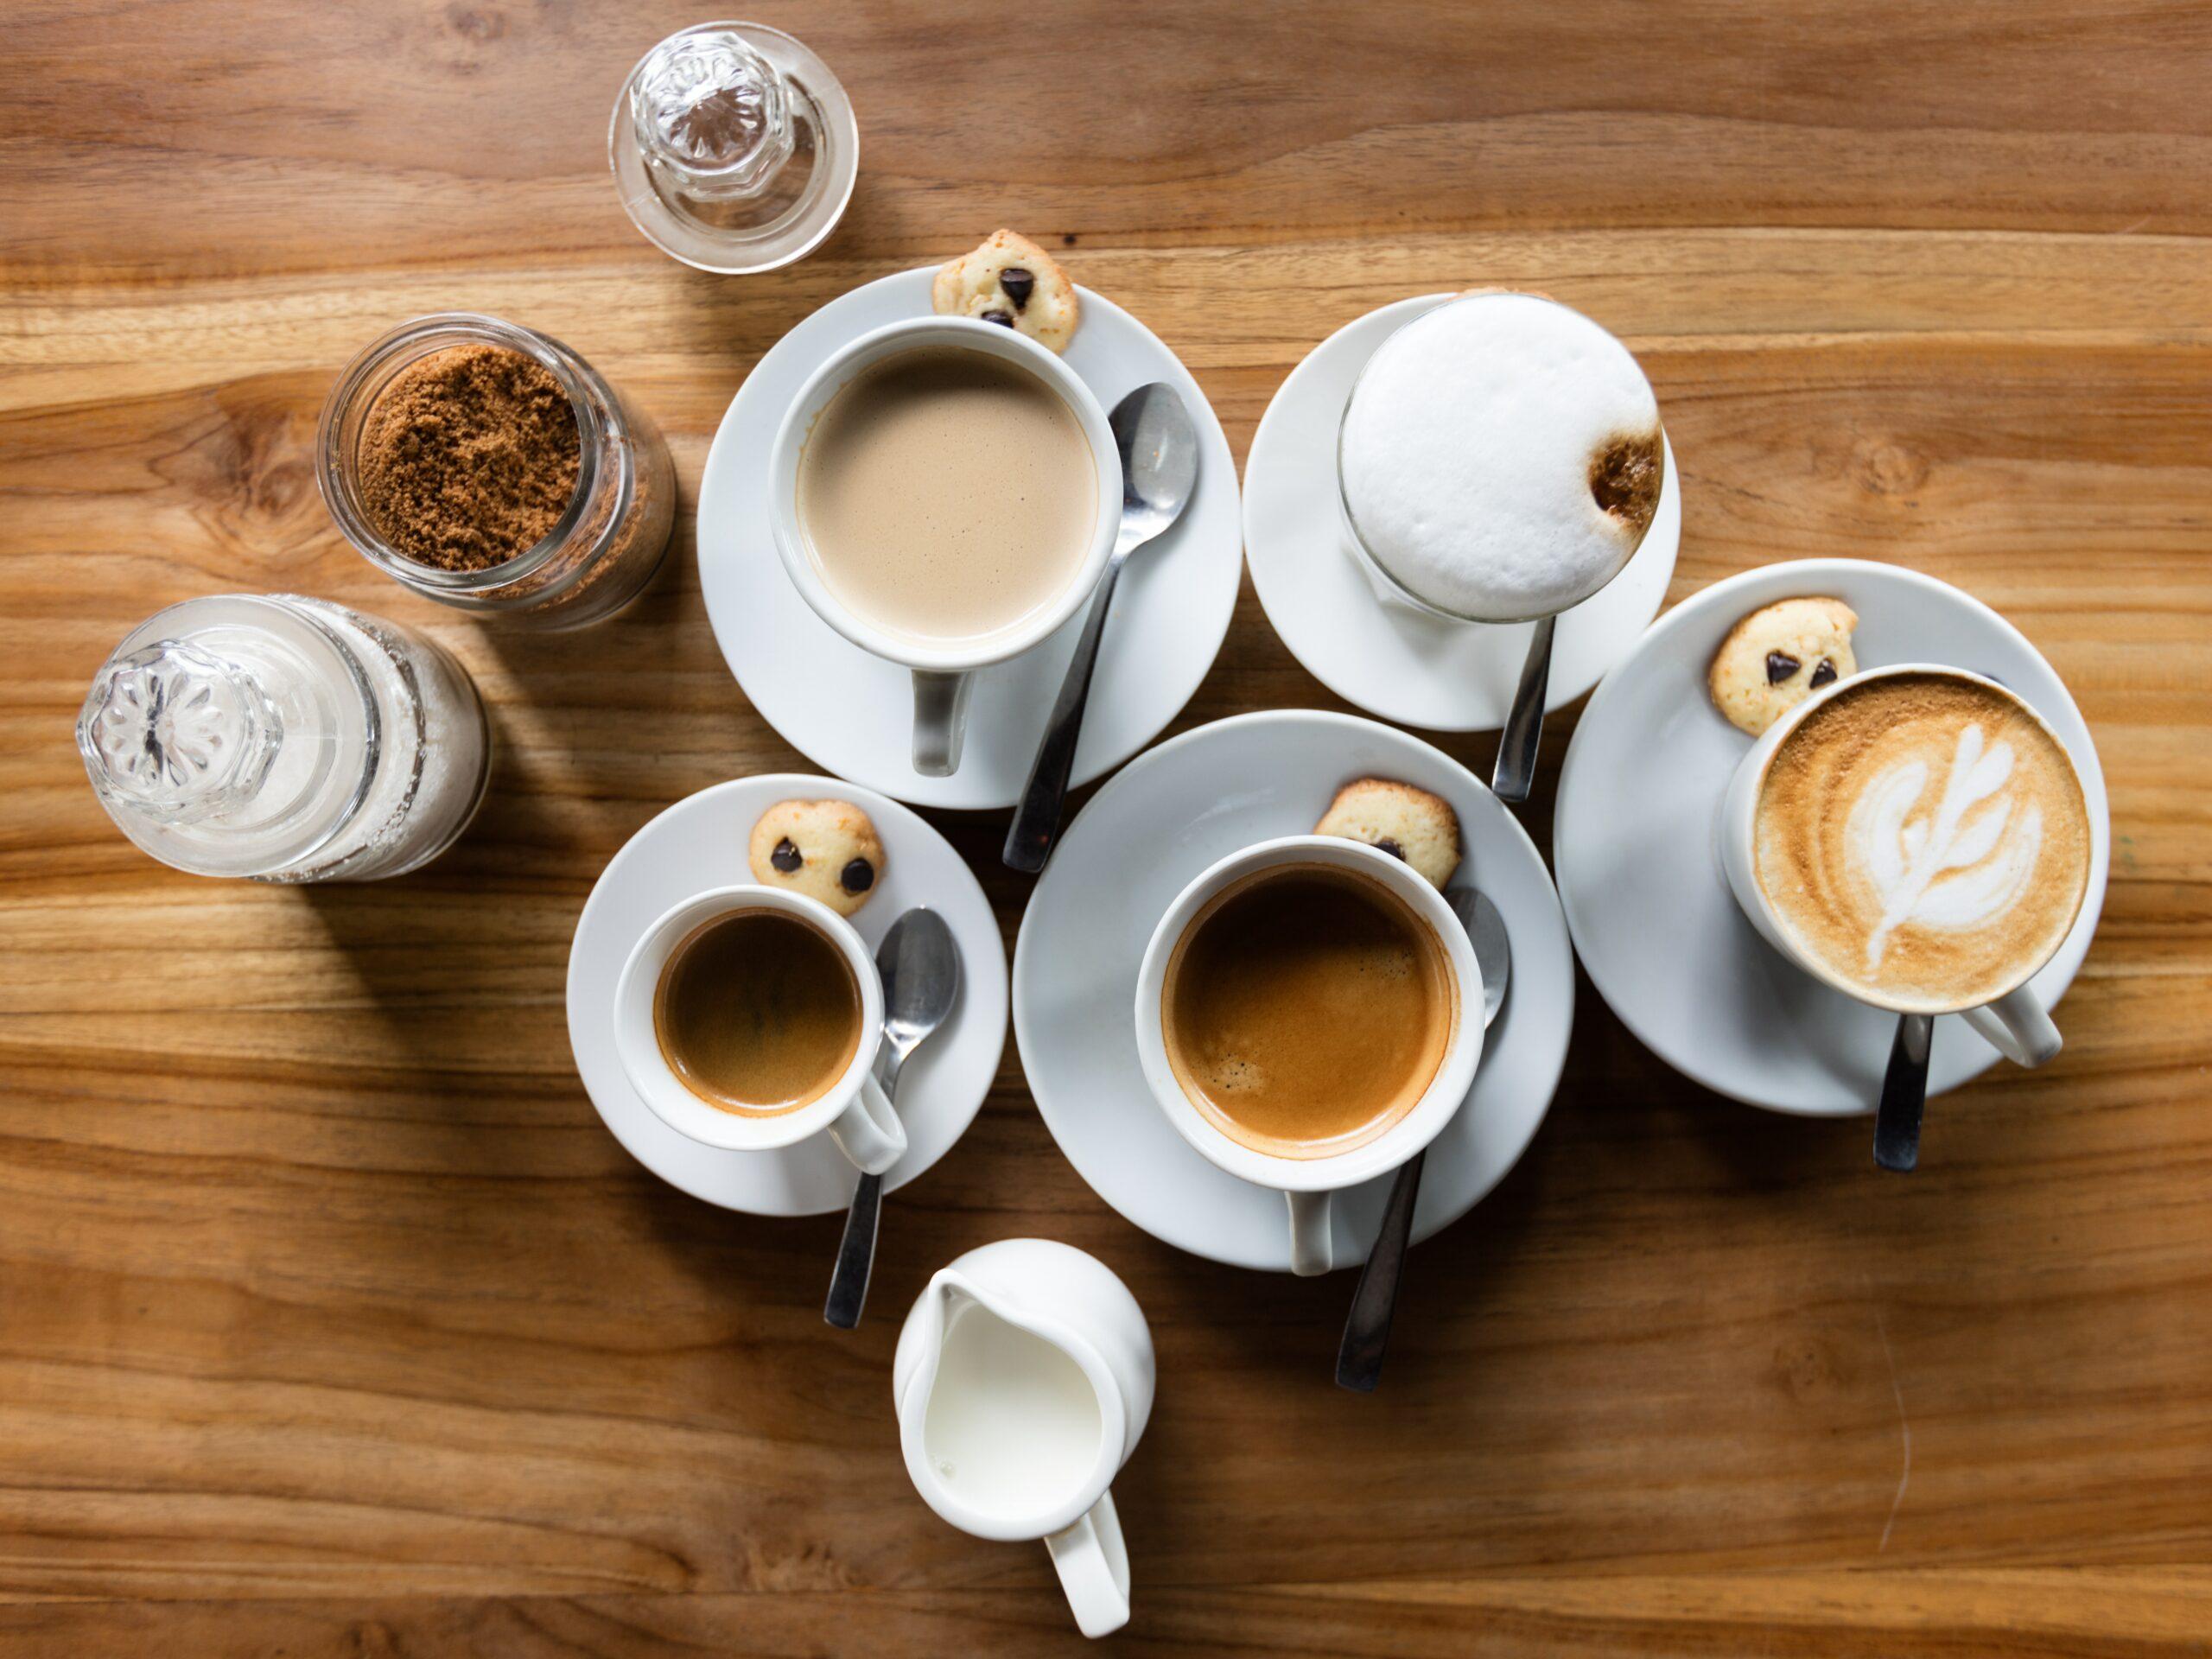 Many Calories in Your Coffee? 15 Different